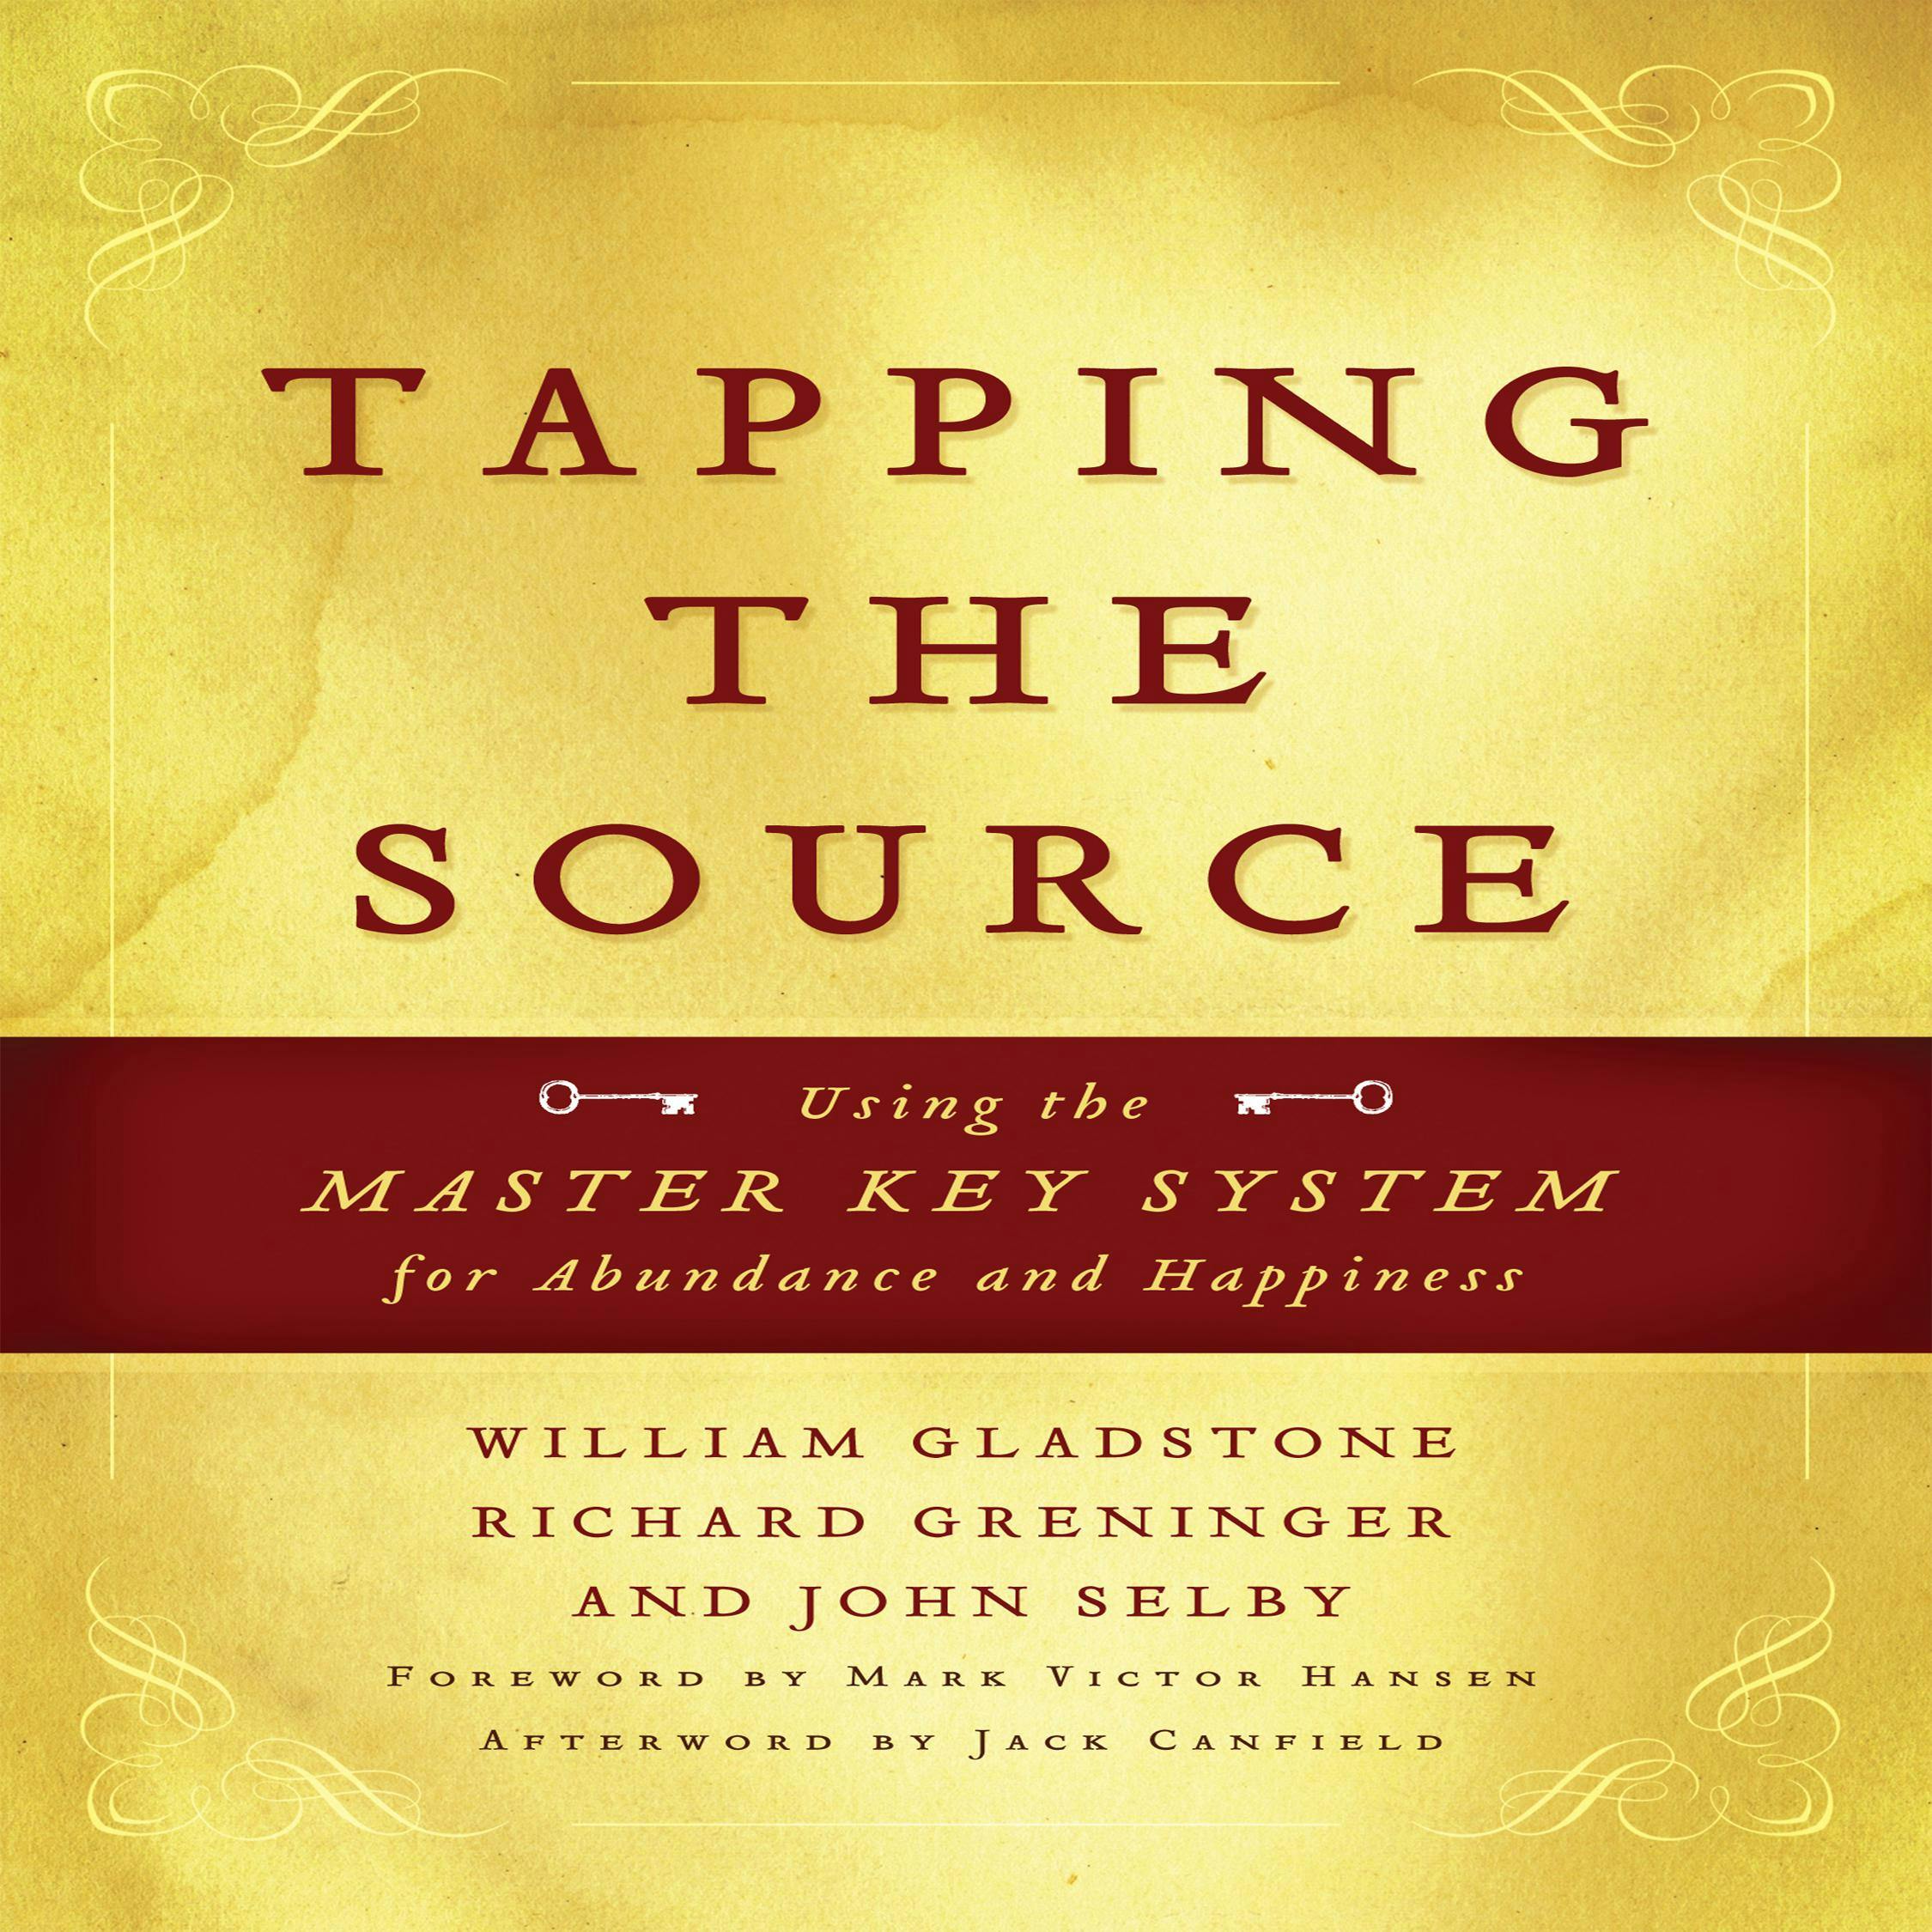 Tapping the Source: Using the Master Key System for Abundance and Happiness - William Gladstone, Jack Canfield, John Selby, Mark Hansen, Richard Greninger